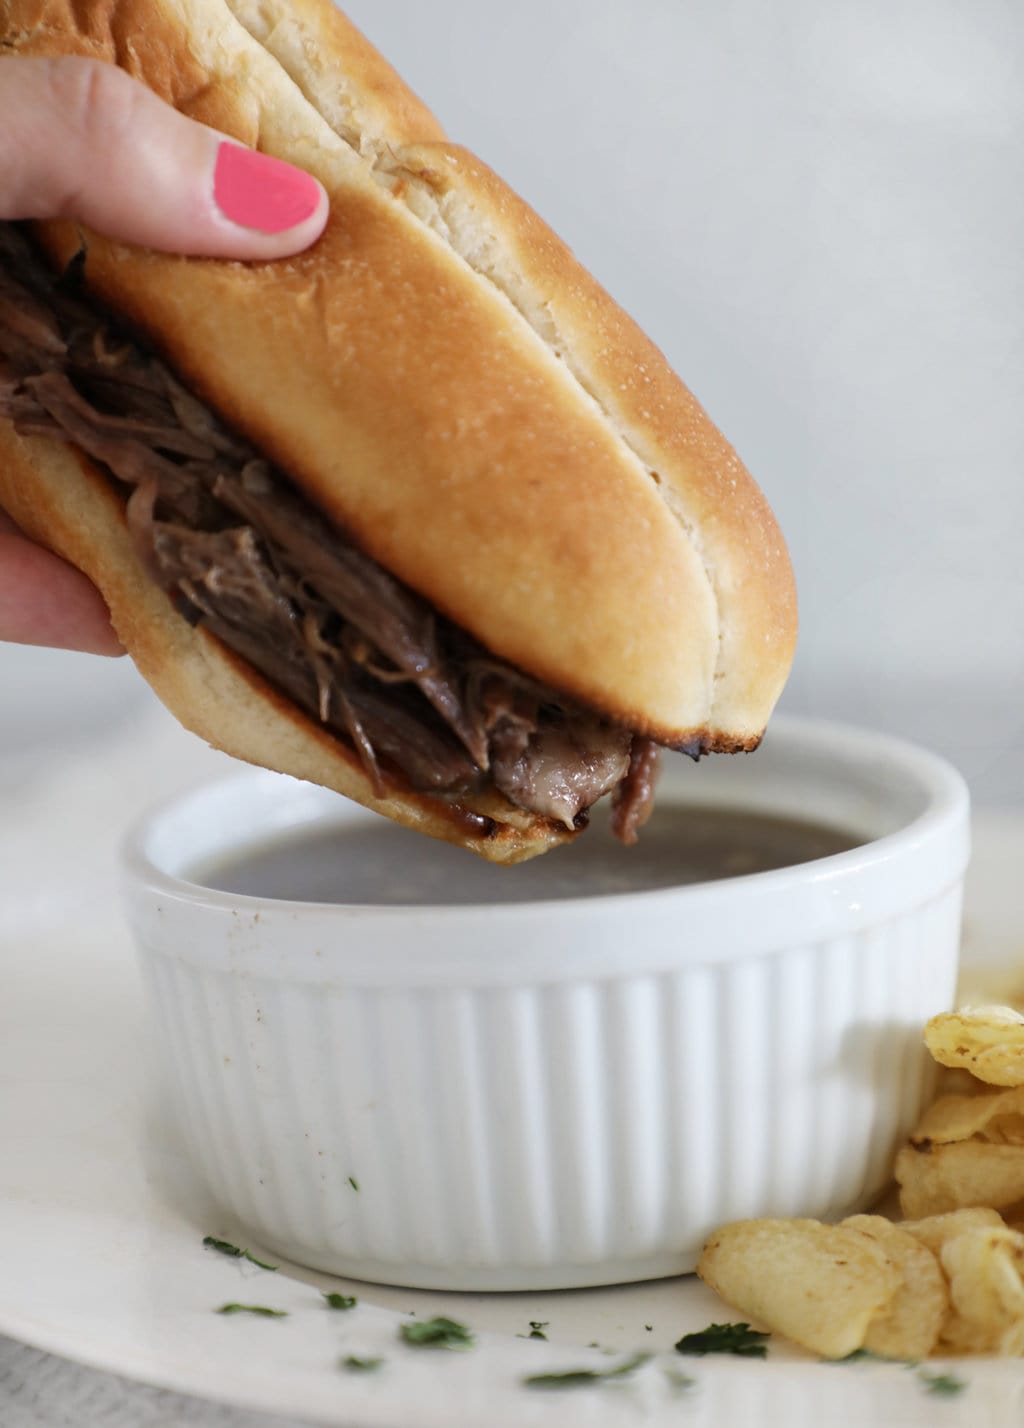 A hand with a pink thumbnail dipping a French dip sandwich into a bowl of au jus. 